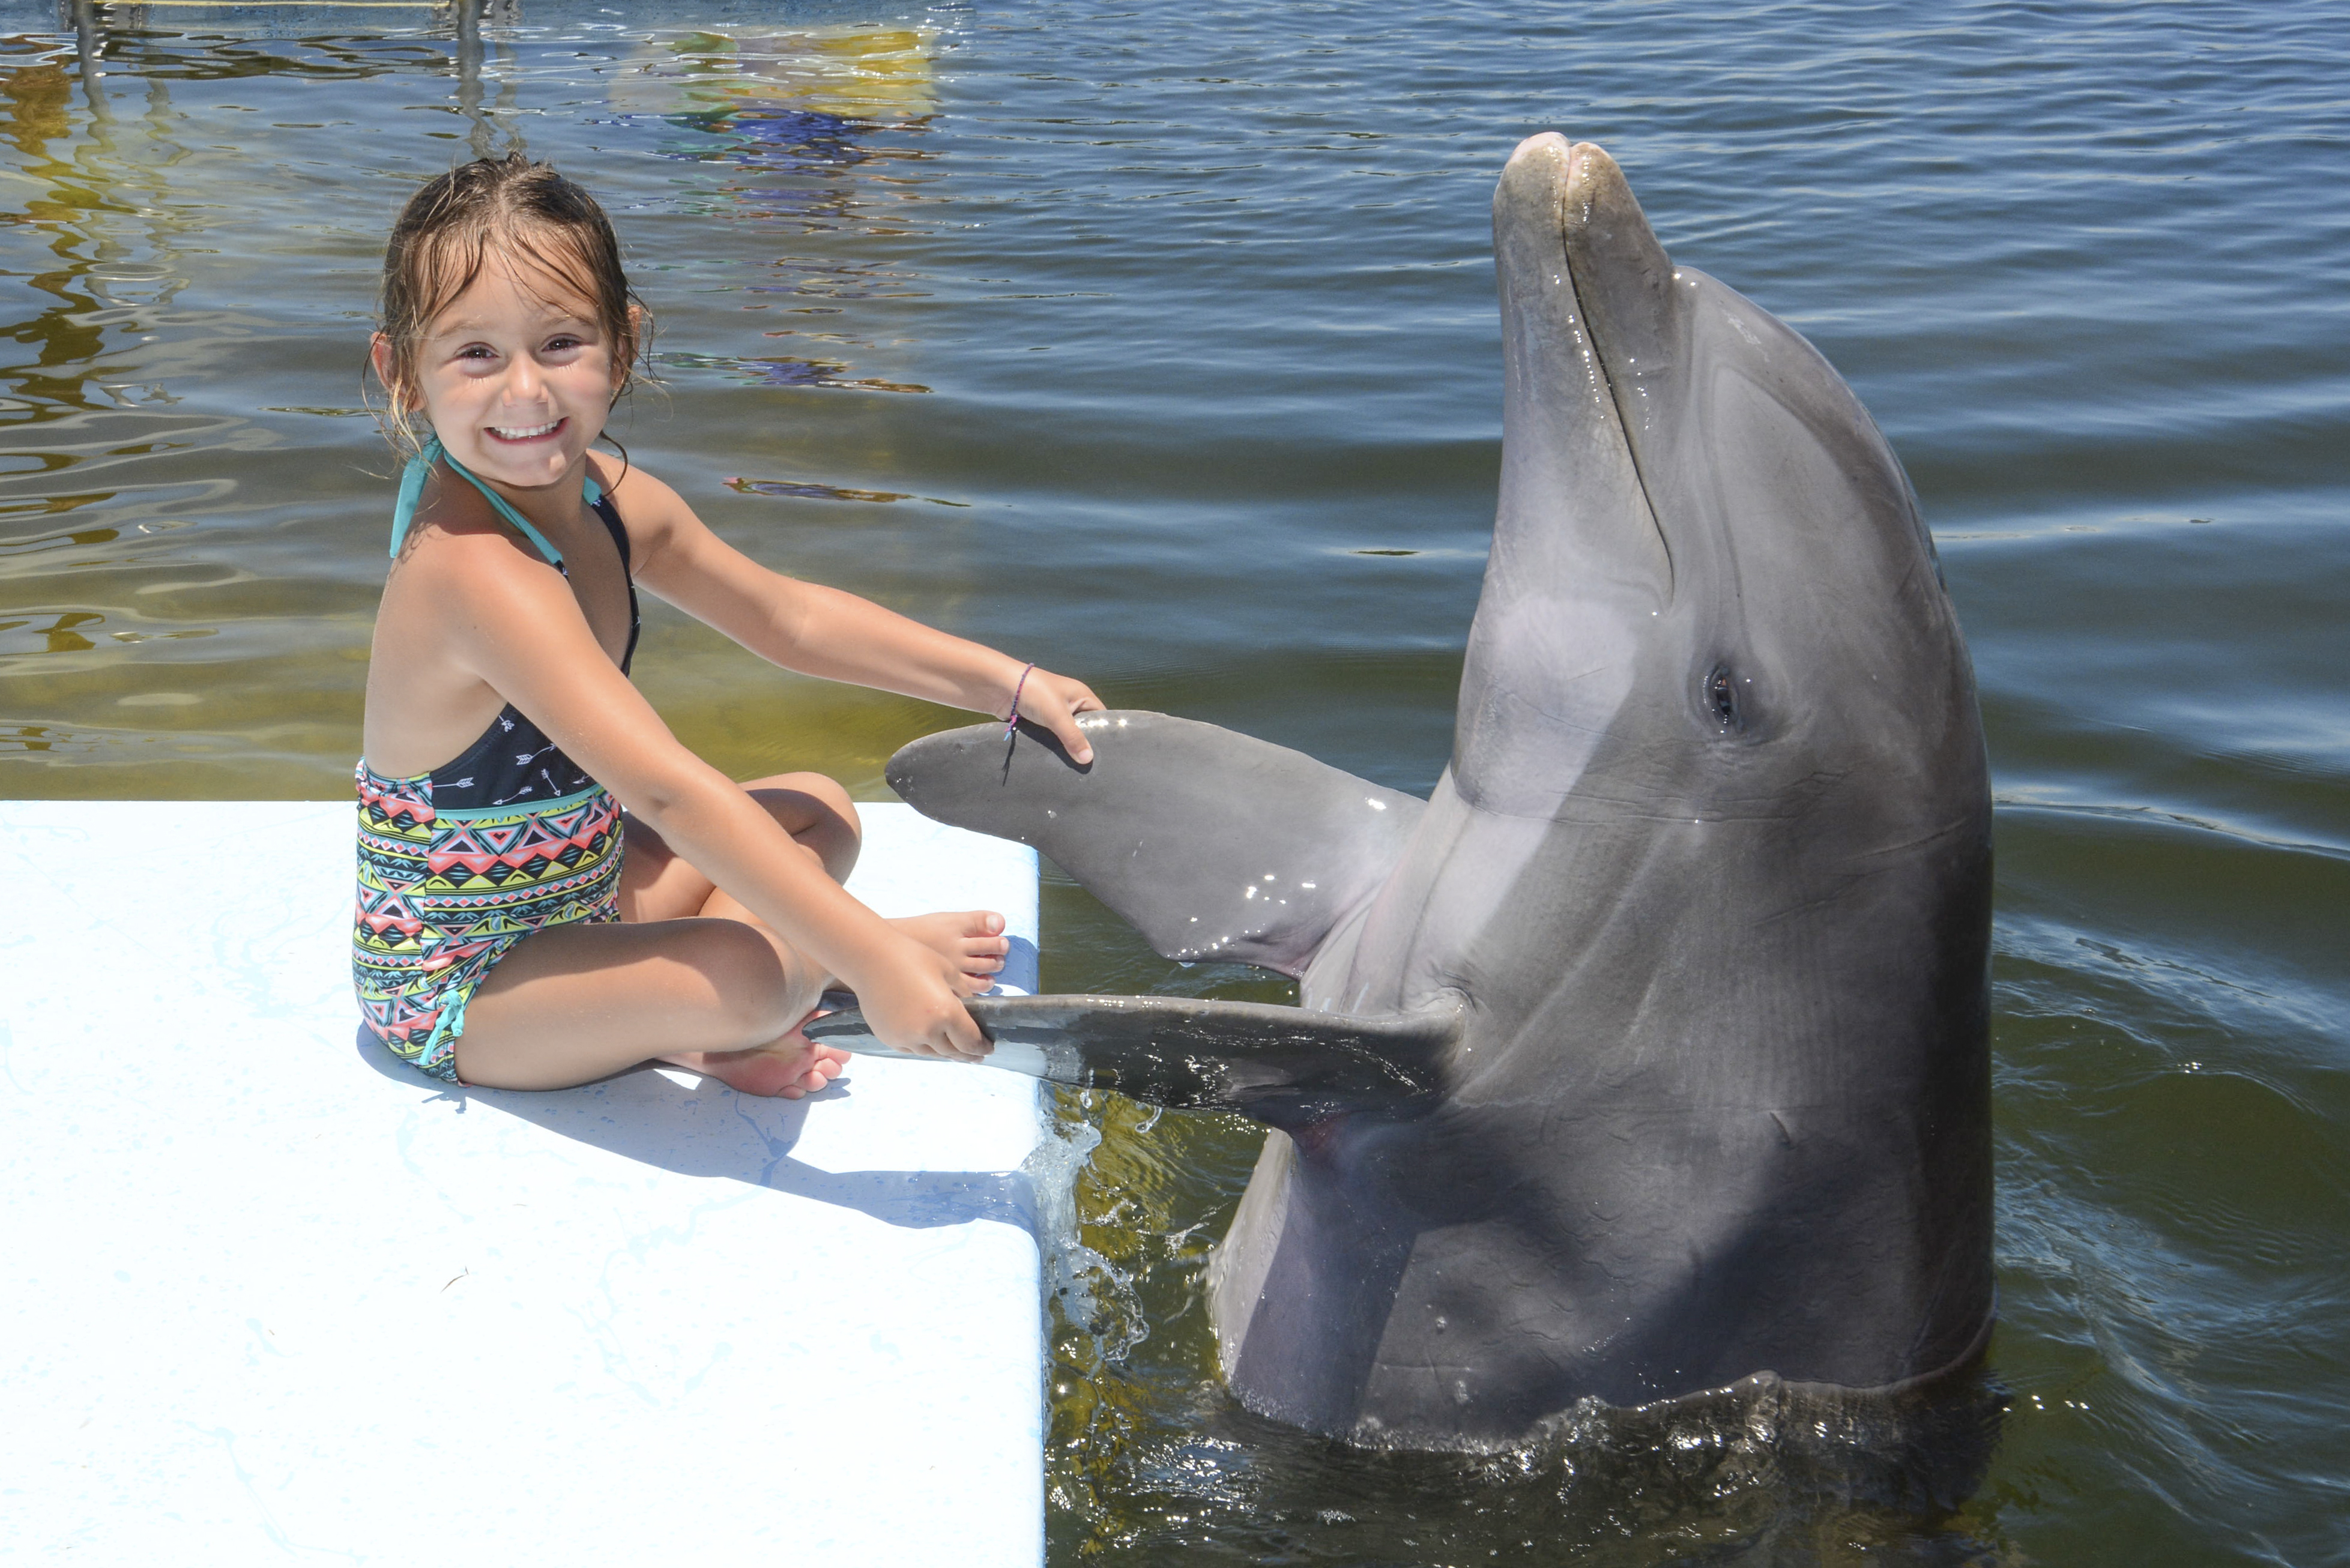 A Child rubs a dolphins' fins during Day Camp.